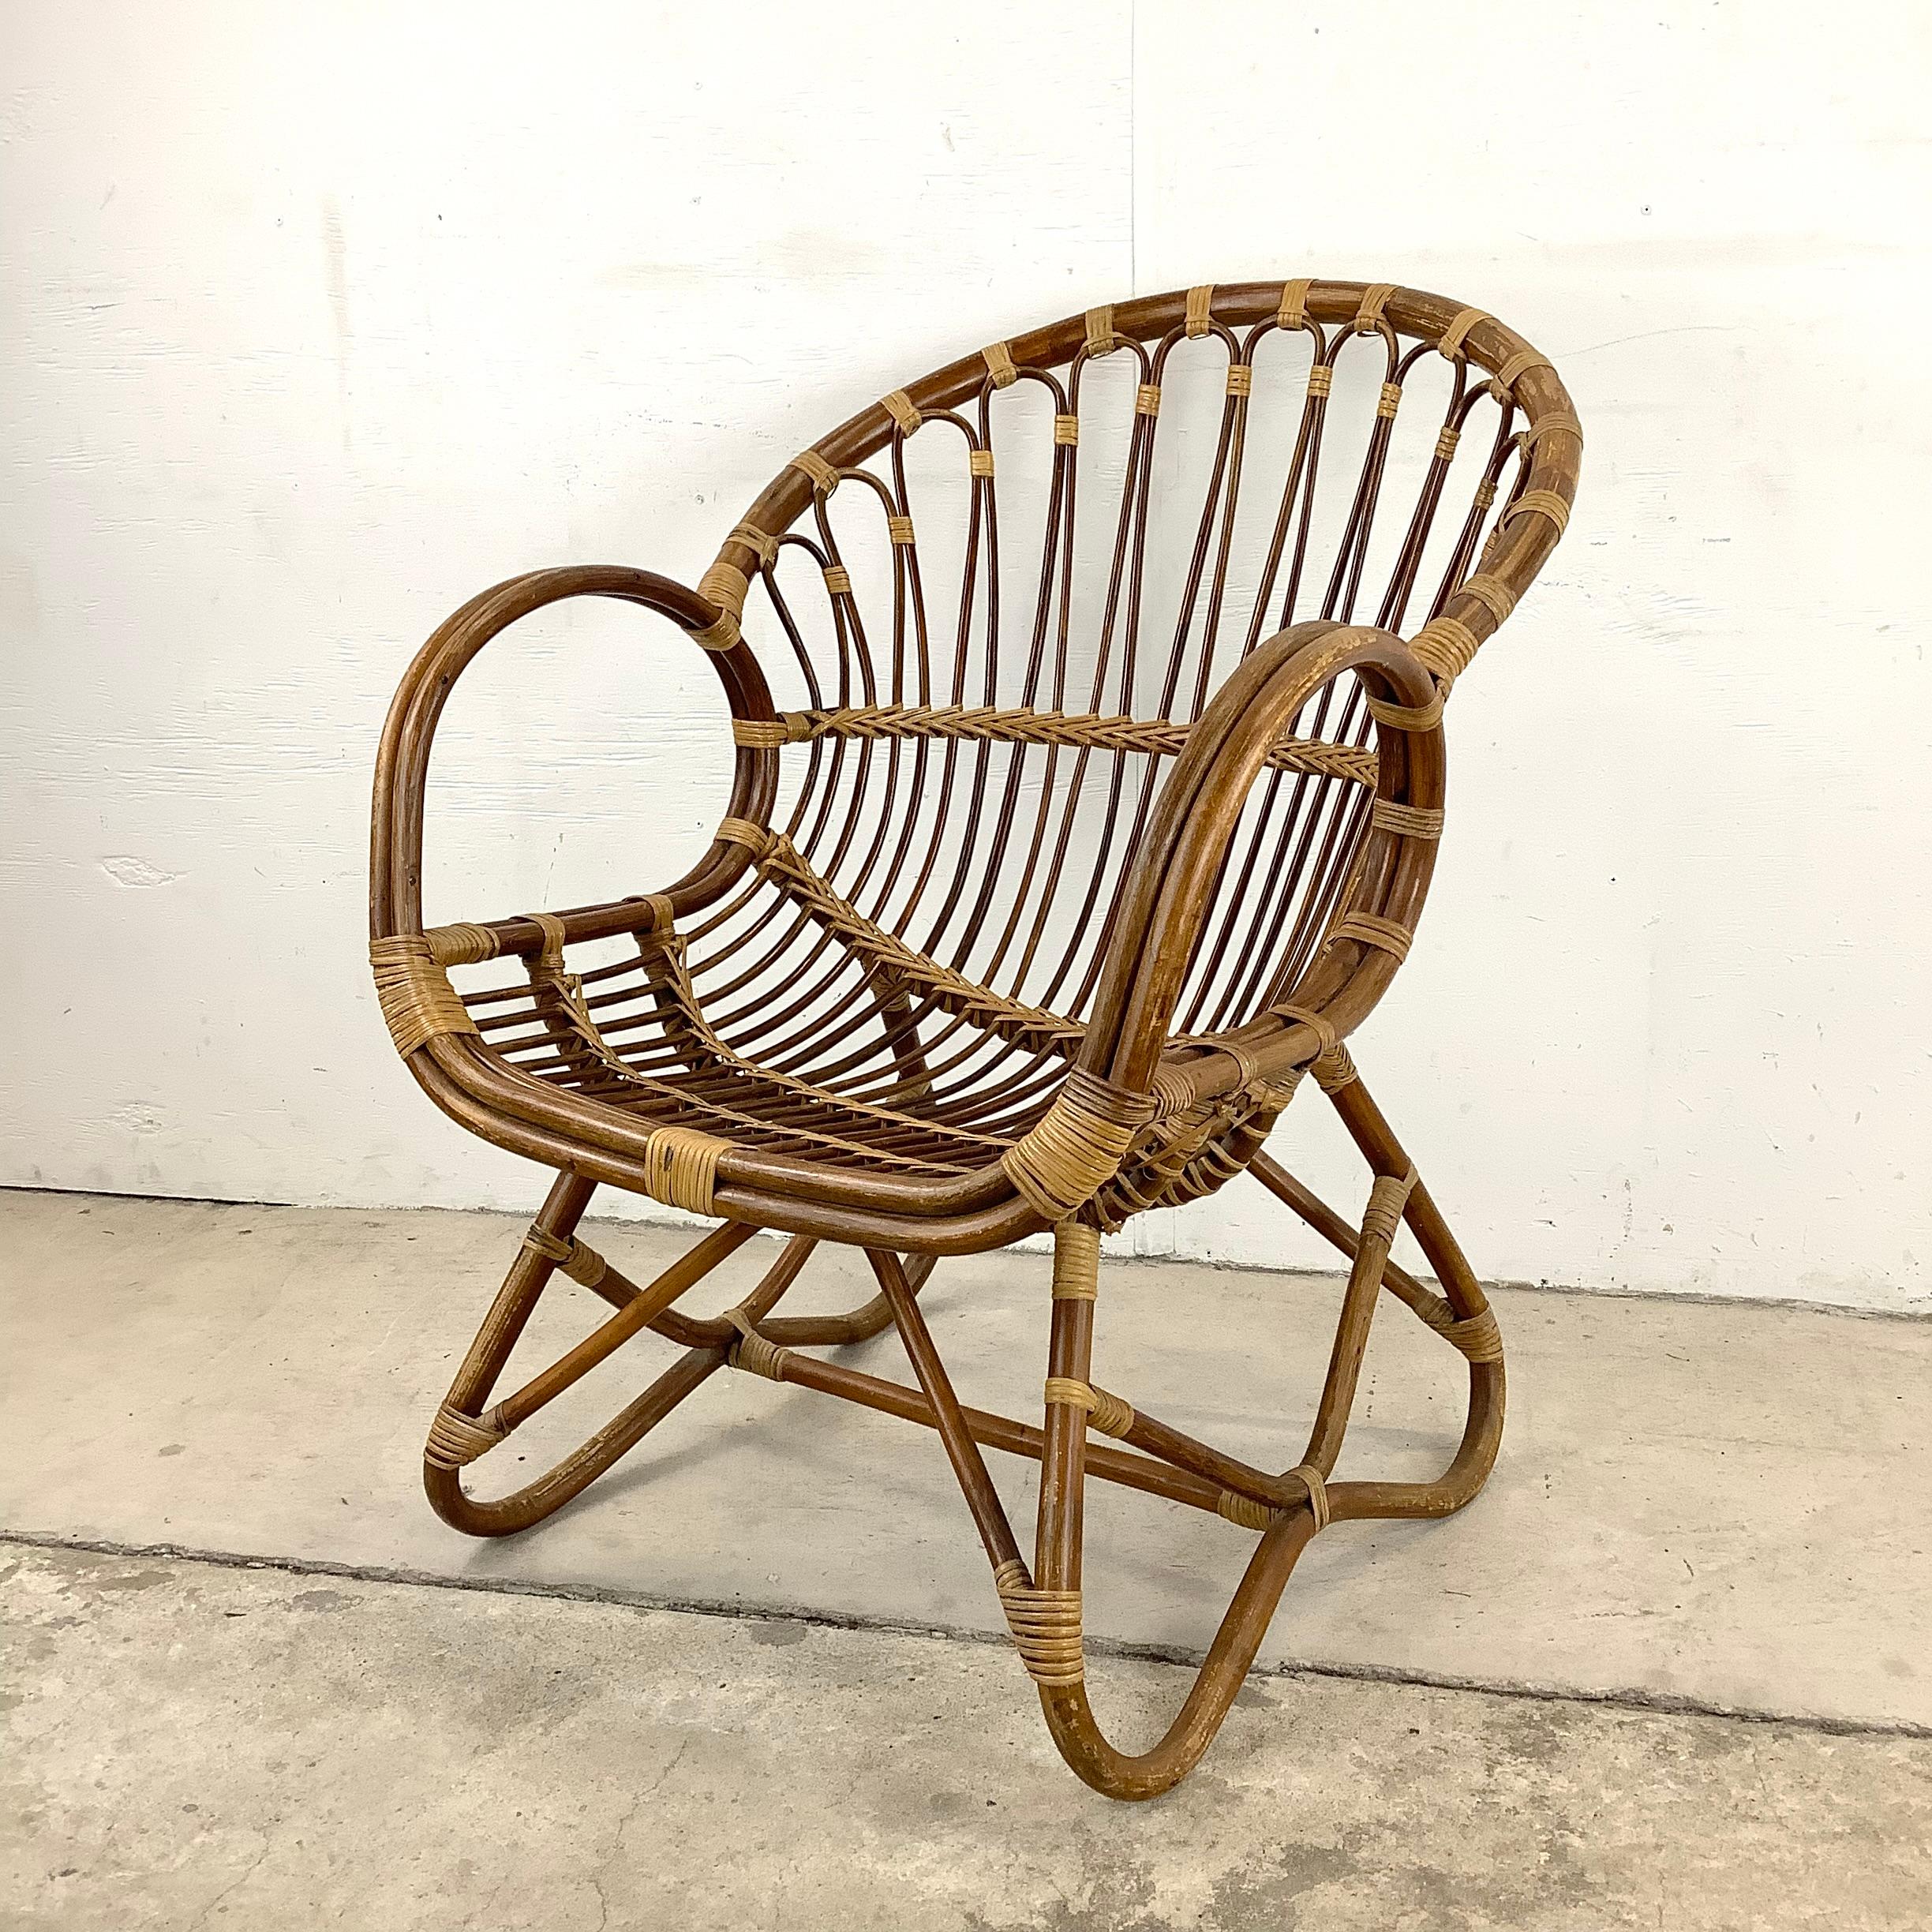 This impressive vintage boho modern arm chair features chic bamboo rattan construction in a uniquely shaped design. A throne armchair for any setting, this mid-century bamboo side chair brings a uniquely eclectic vibe to every